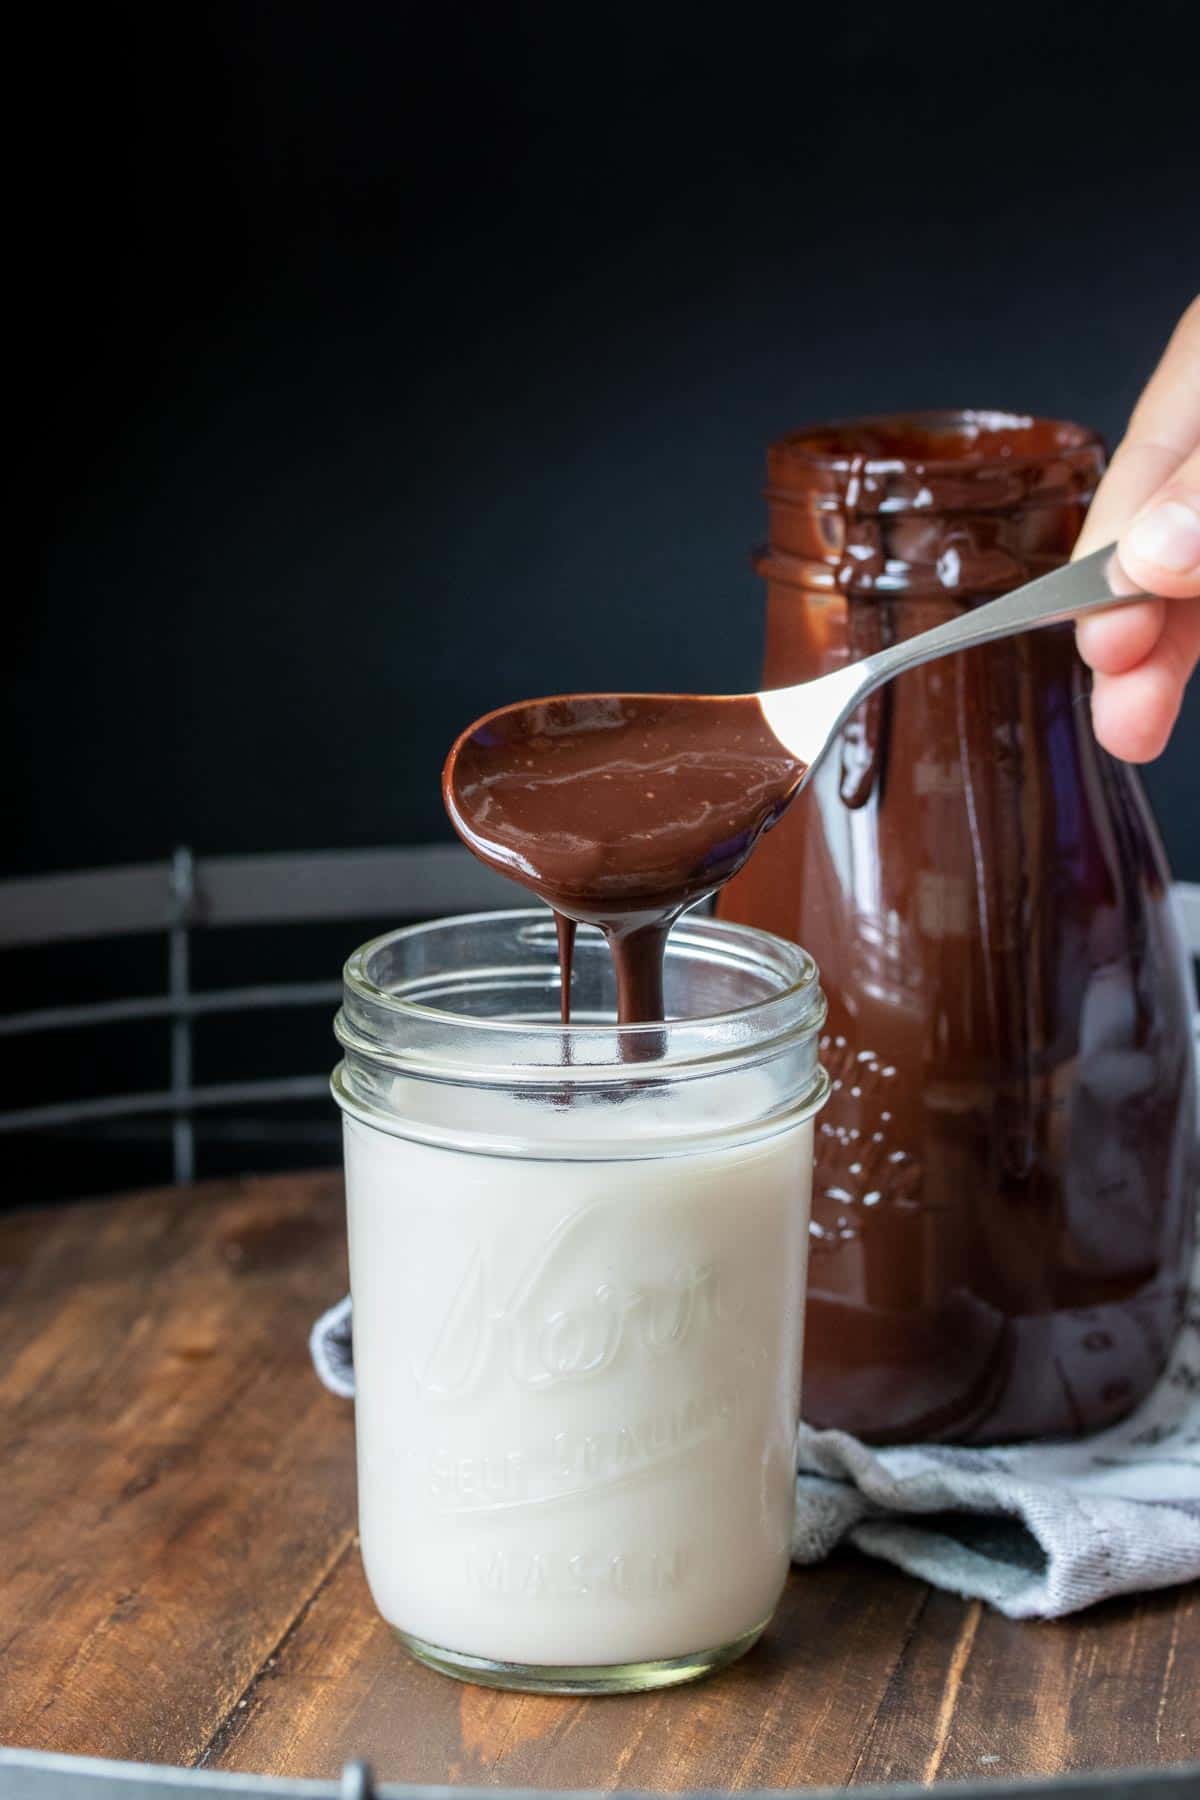 Spoon putting chocolate syrup into a glass of milk with a spoon